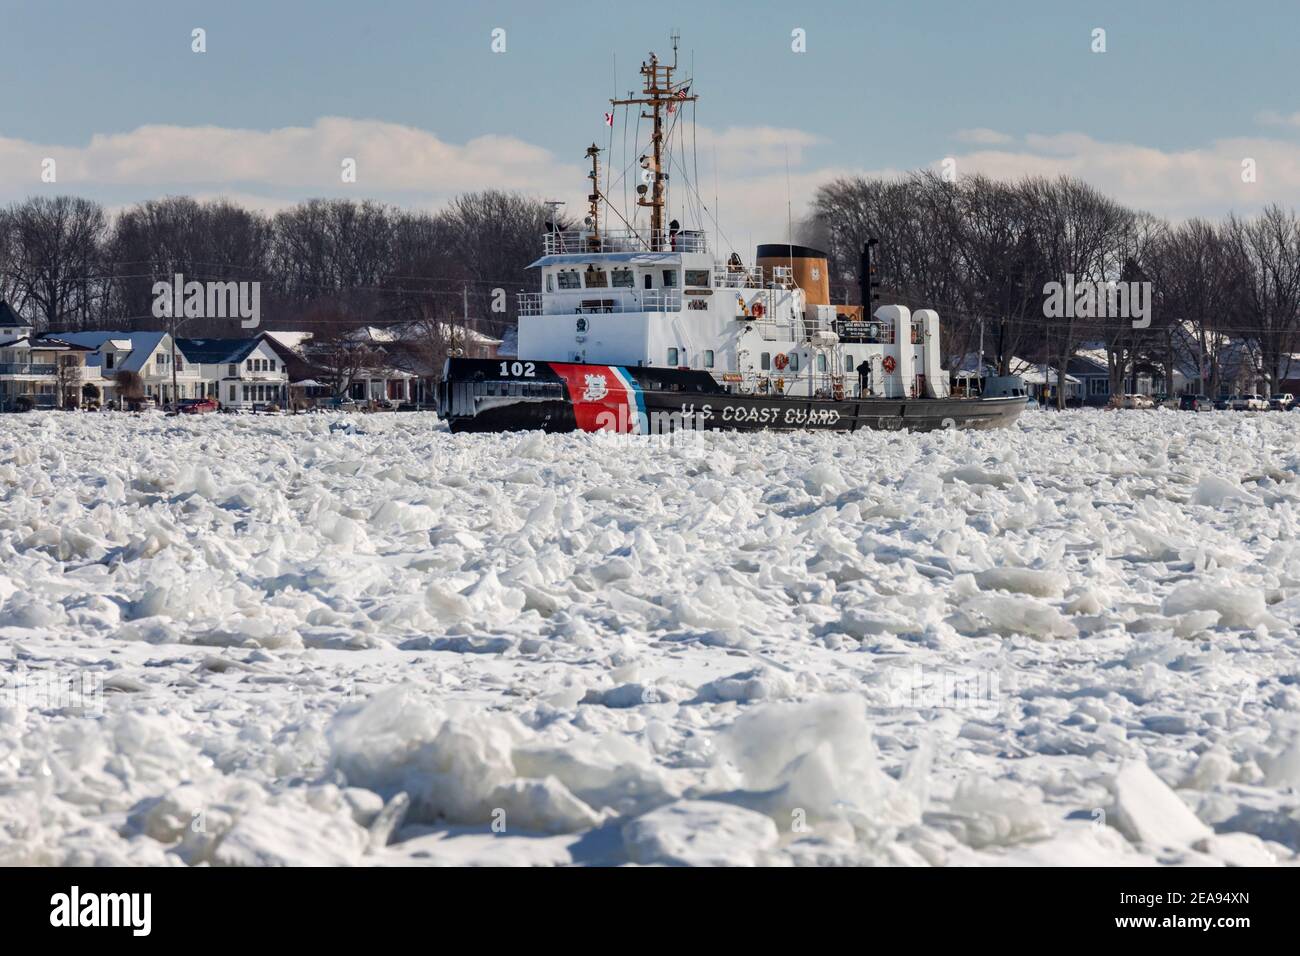 Roberts Landing, Michigan, USA. 7th Feb, 2021. The U.S. Coast Guard Cutter Bristol Bay breaks up ice on the St. Clair River. Bitter cold has led to ice jams on the river and flooding in shoreline communities. The St. Clair River is the border between the U.S. and Canada; it drains the upper Great Lakes towards Lake St. Clair and on to Lake Erie. Credit: Jim West/Alamy Live News Stock Photo